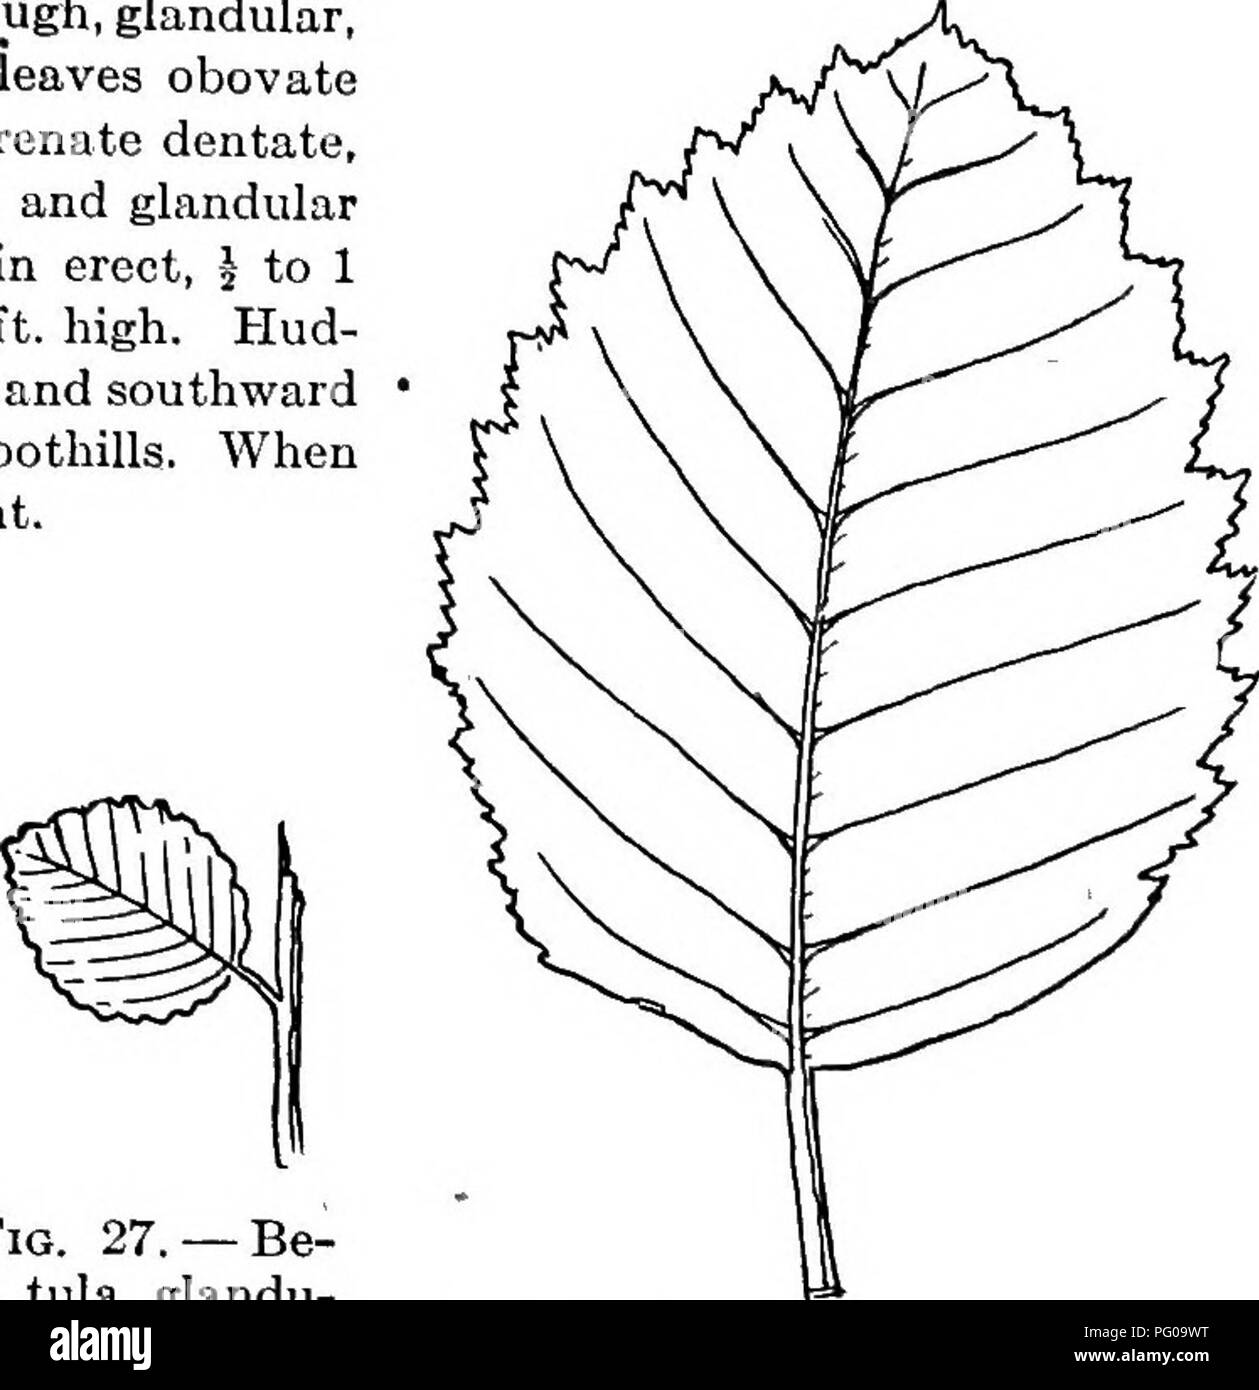 . Selected western flora : Manitoba, Saskatchewan, Alberta . Botany; Botany; Botany. Fio. 26. —Betula pumila.. Fig. 27. —Be- tula glandu- losa. Fig. 28. — Alnus incana. 4. ALNUS. Alder. Sterile flowers with 4 or 5 braotlets and usually 3 flowers to each scale of the catkin, each flower with a 3-5-parted calyx and the same number of stamens; fertile catkins oyhndrical or ovoid, made up of fleshy scales, with 2 or 3 flowers in the axil of each; calyx of 4 bracts. Small trees or shrubs usually growing in clumps. 1. A. incSna, (L.) Moench. Tag Alder. Flowers developed before the leaves; catkins cl Stock Photo